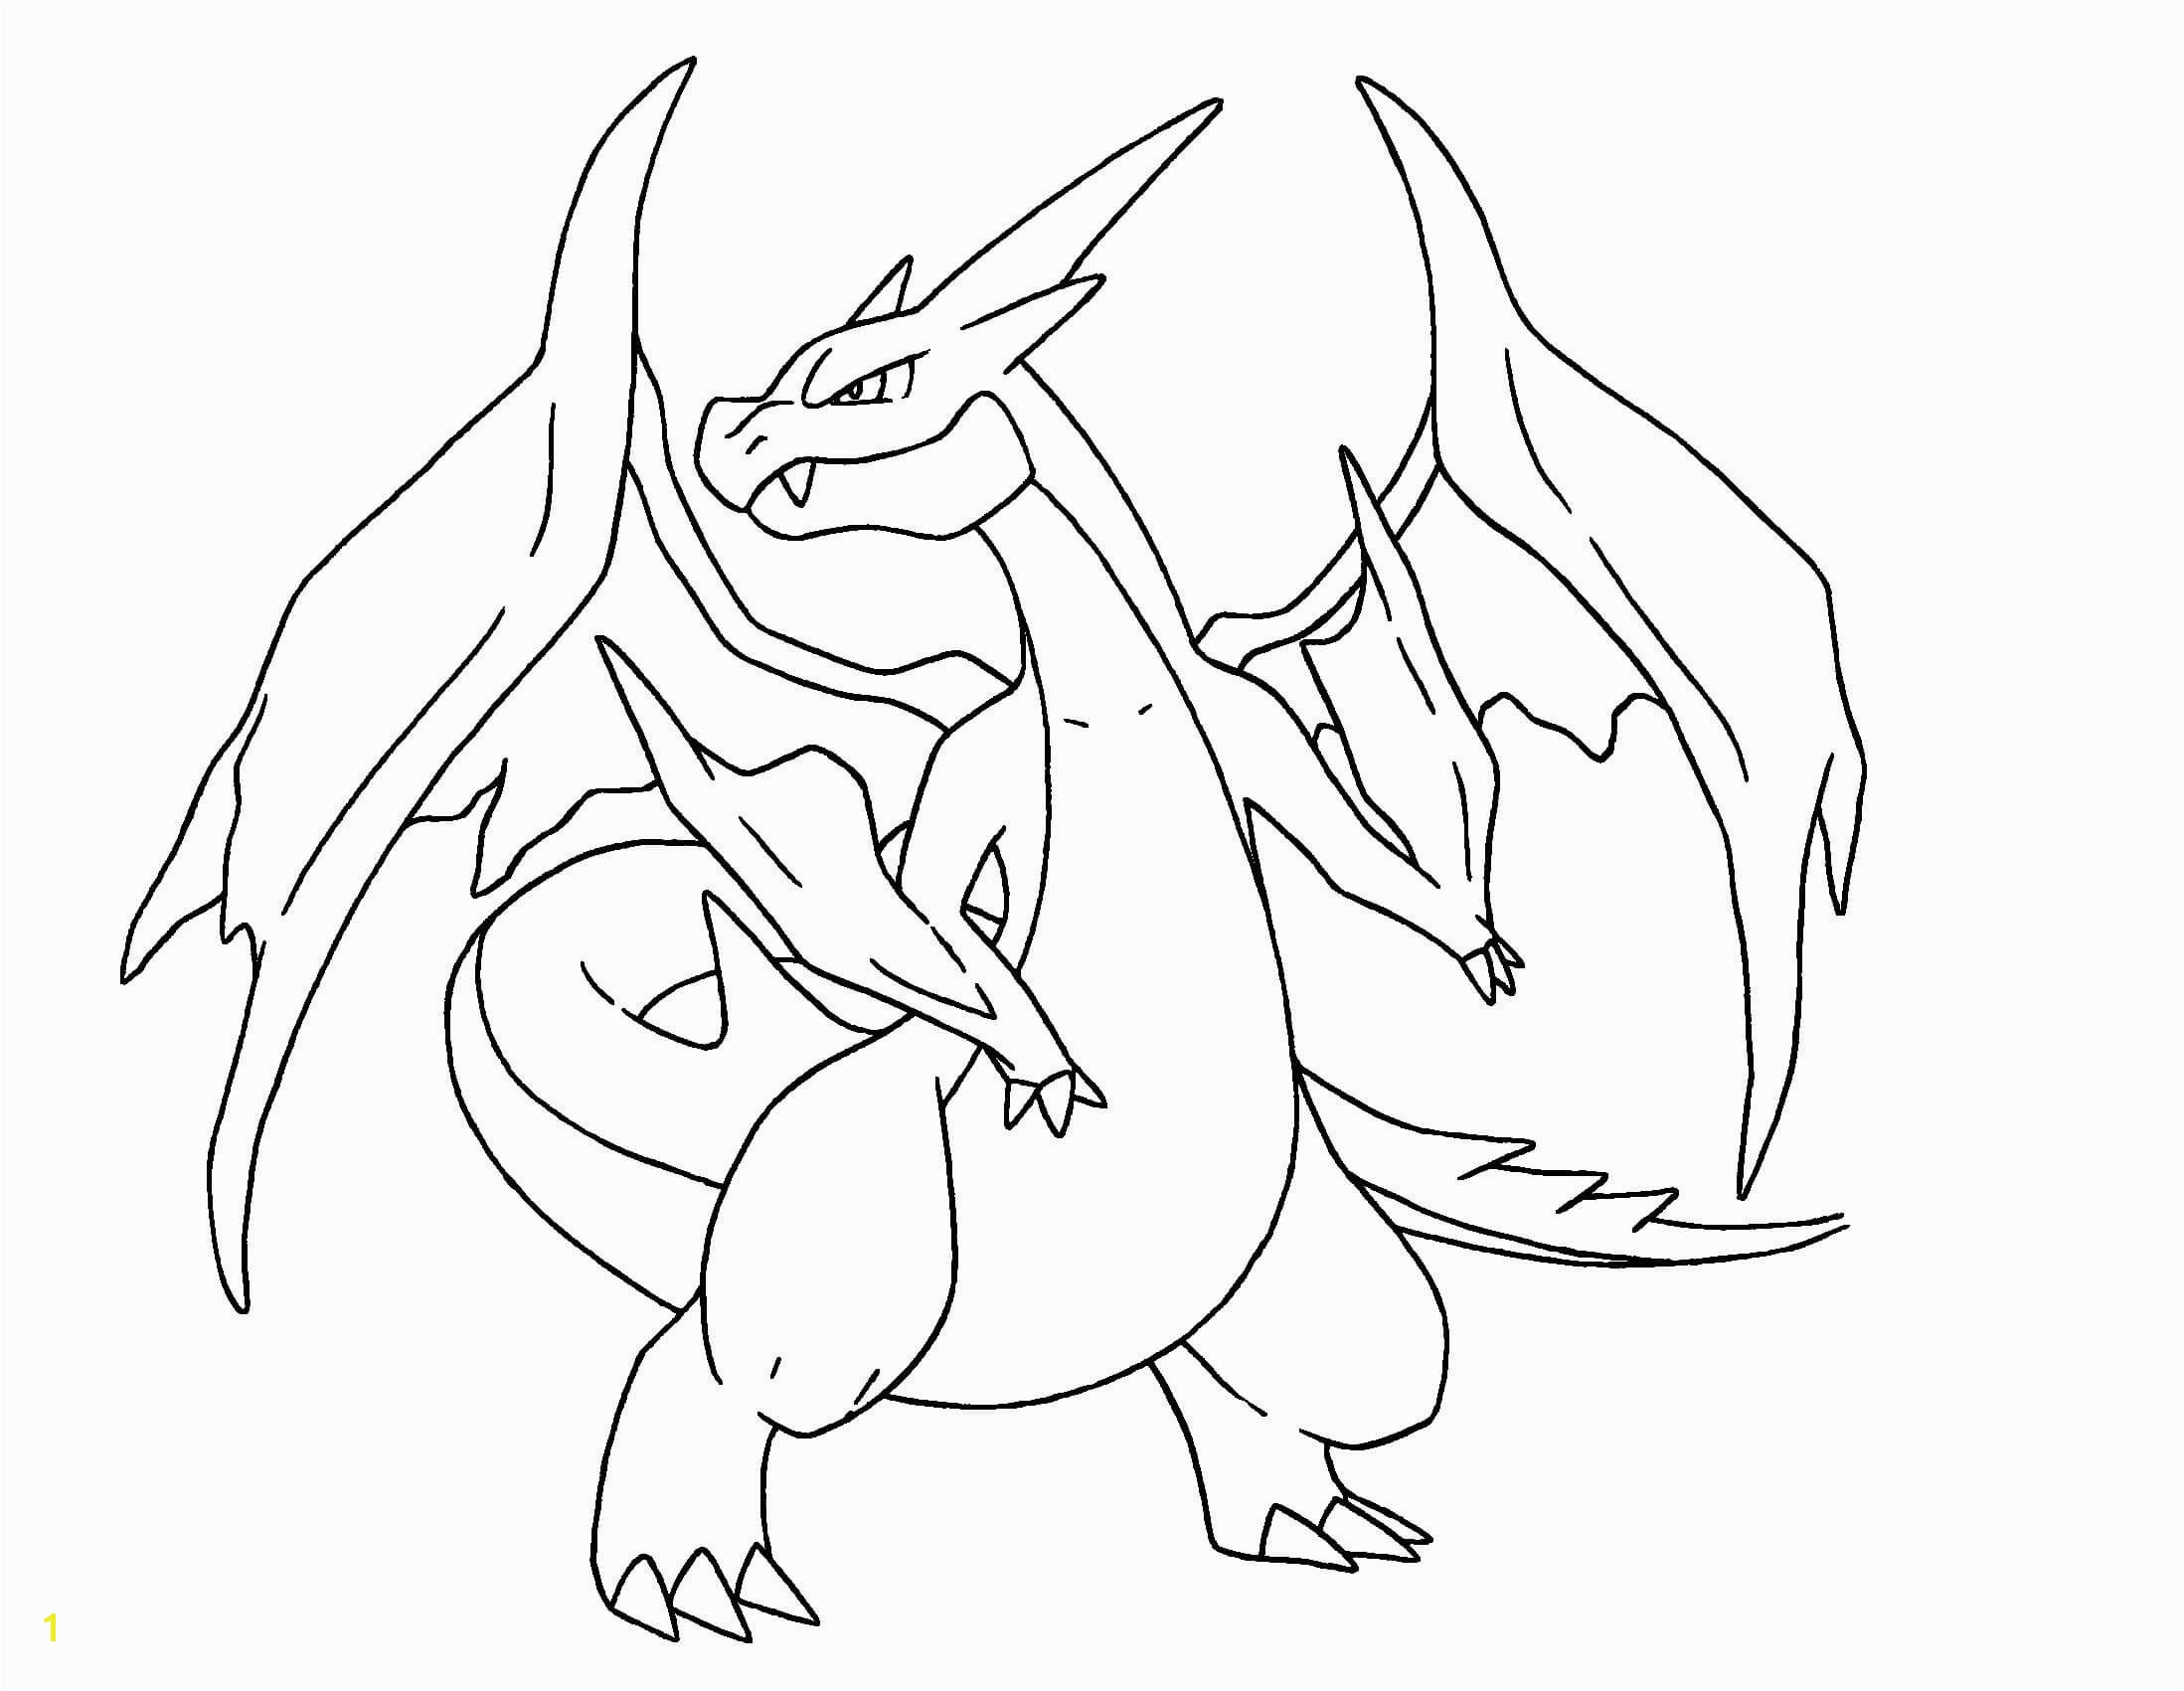 Awesome Pokemon Mega Coloring Pages Download 3 c Mega Charizard Pokemon Coloring Pages Sketch